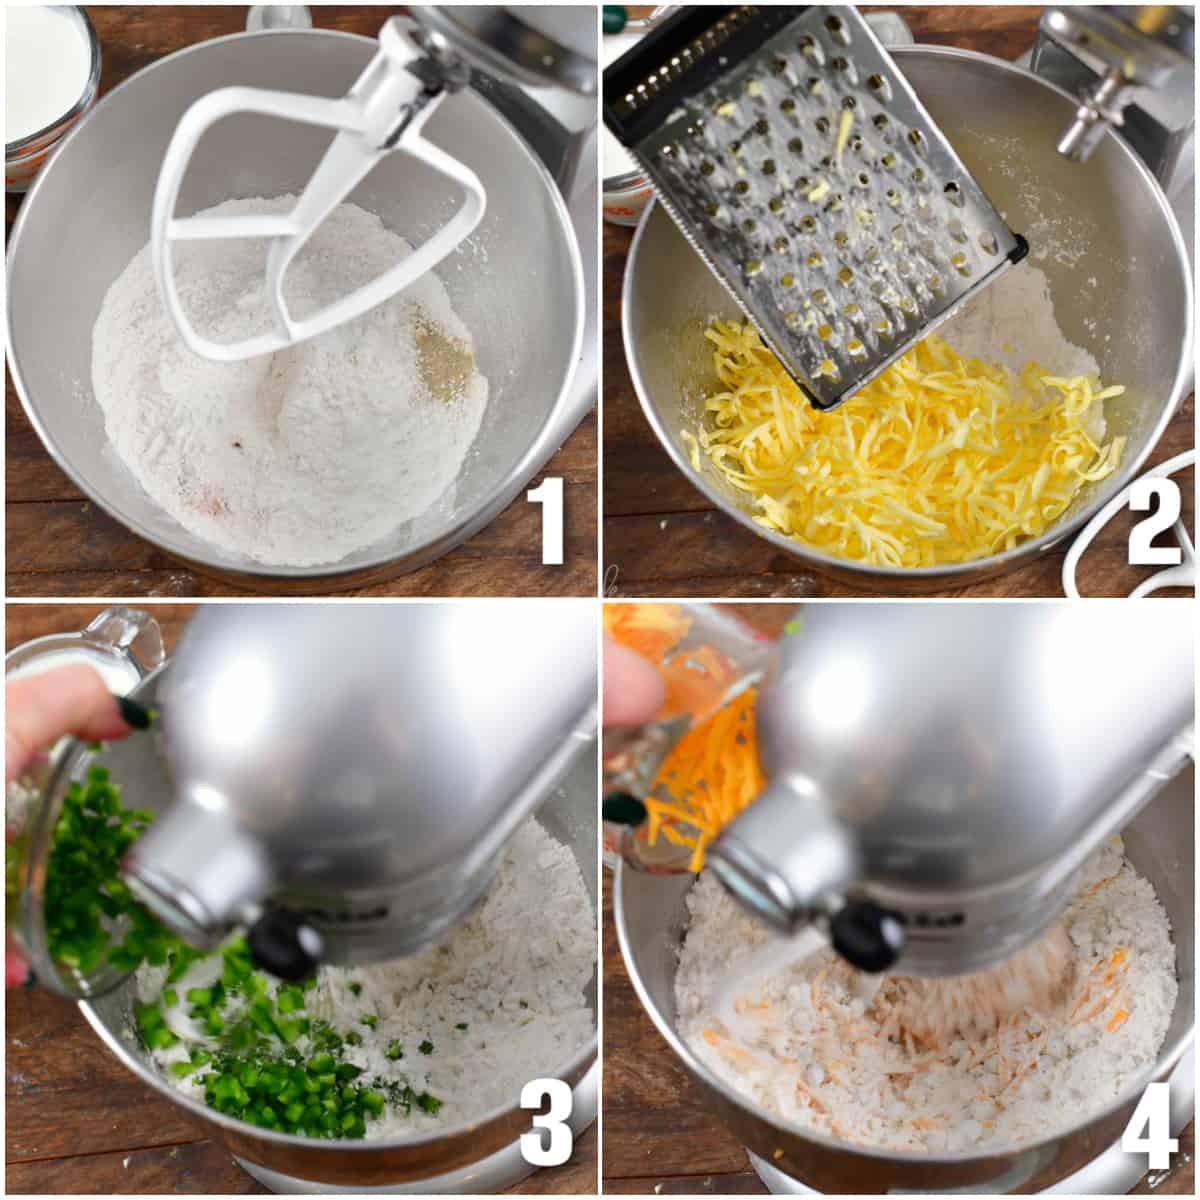 Collage of four images of Jalapeno Cheddar biscuits ingredients being mixed in a mixer.